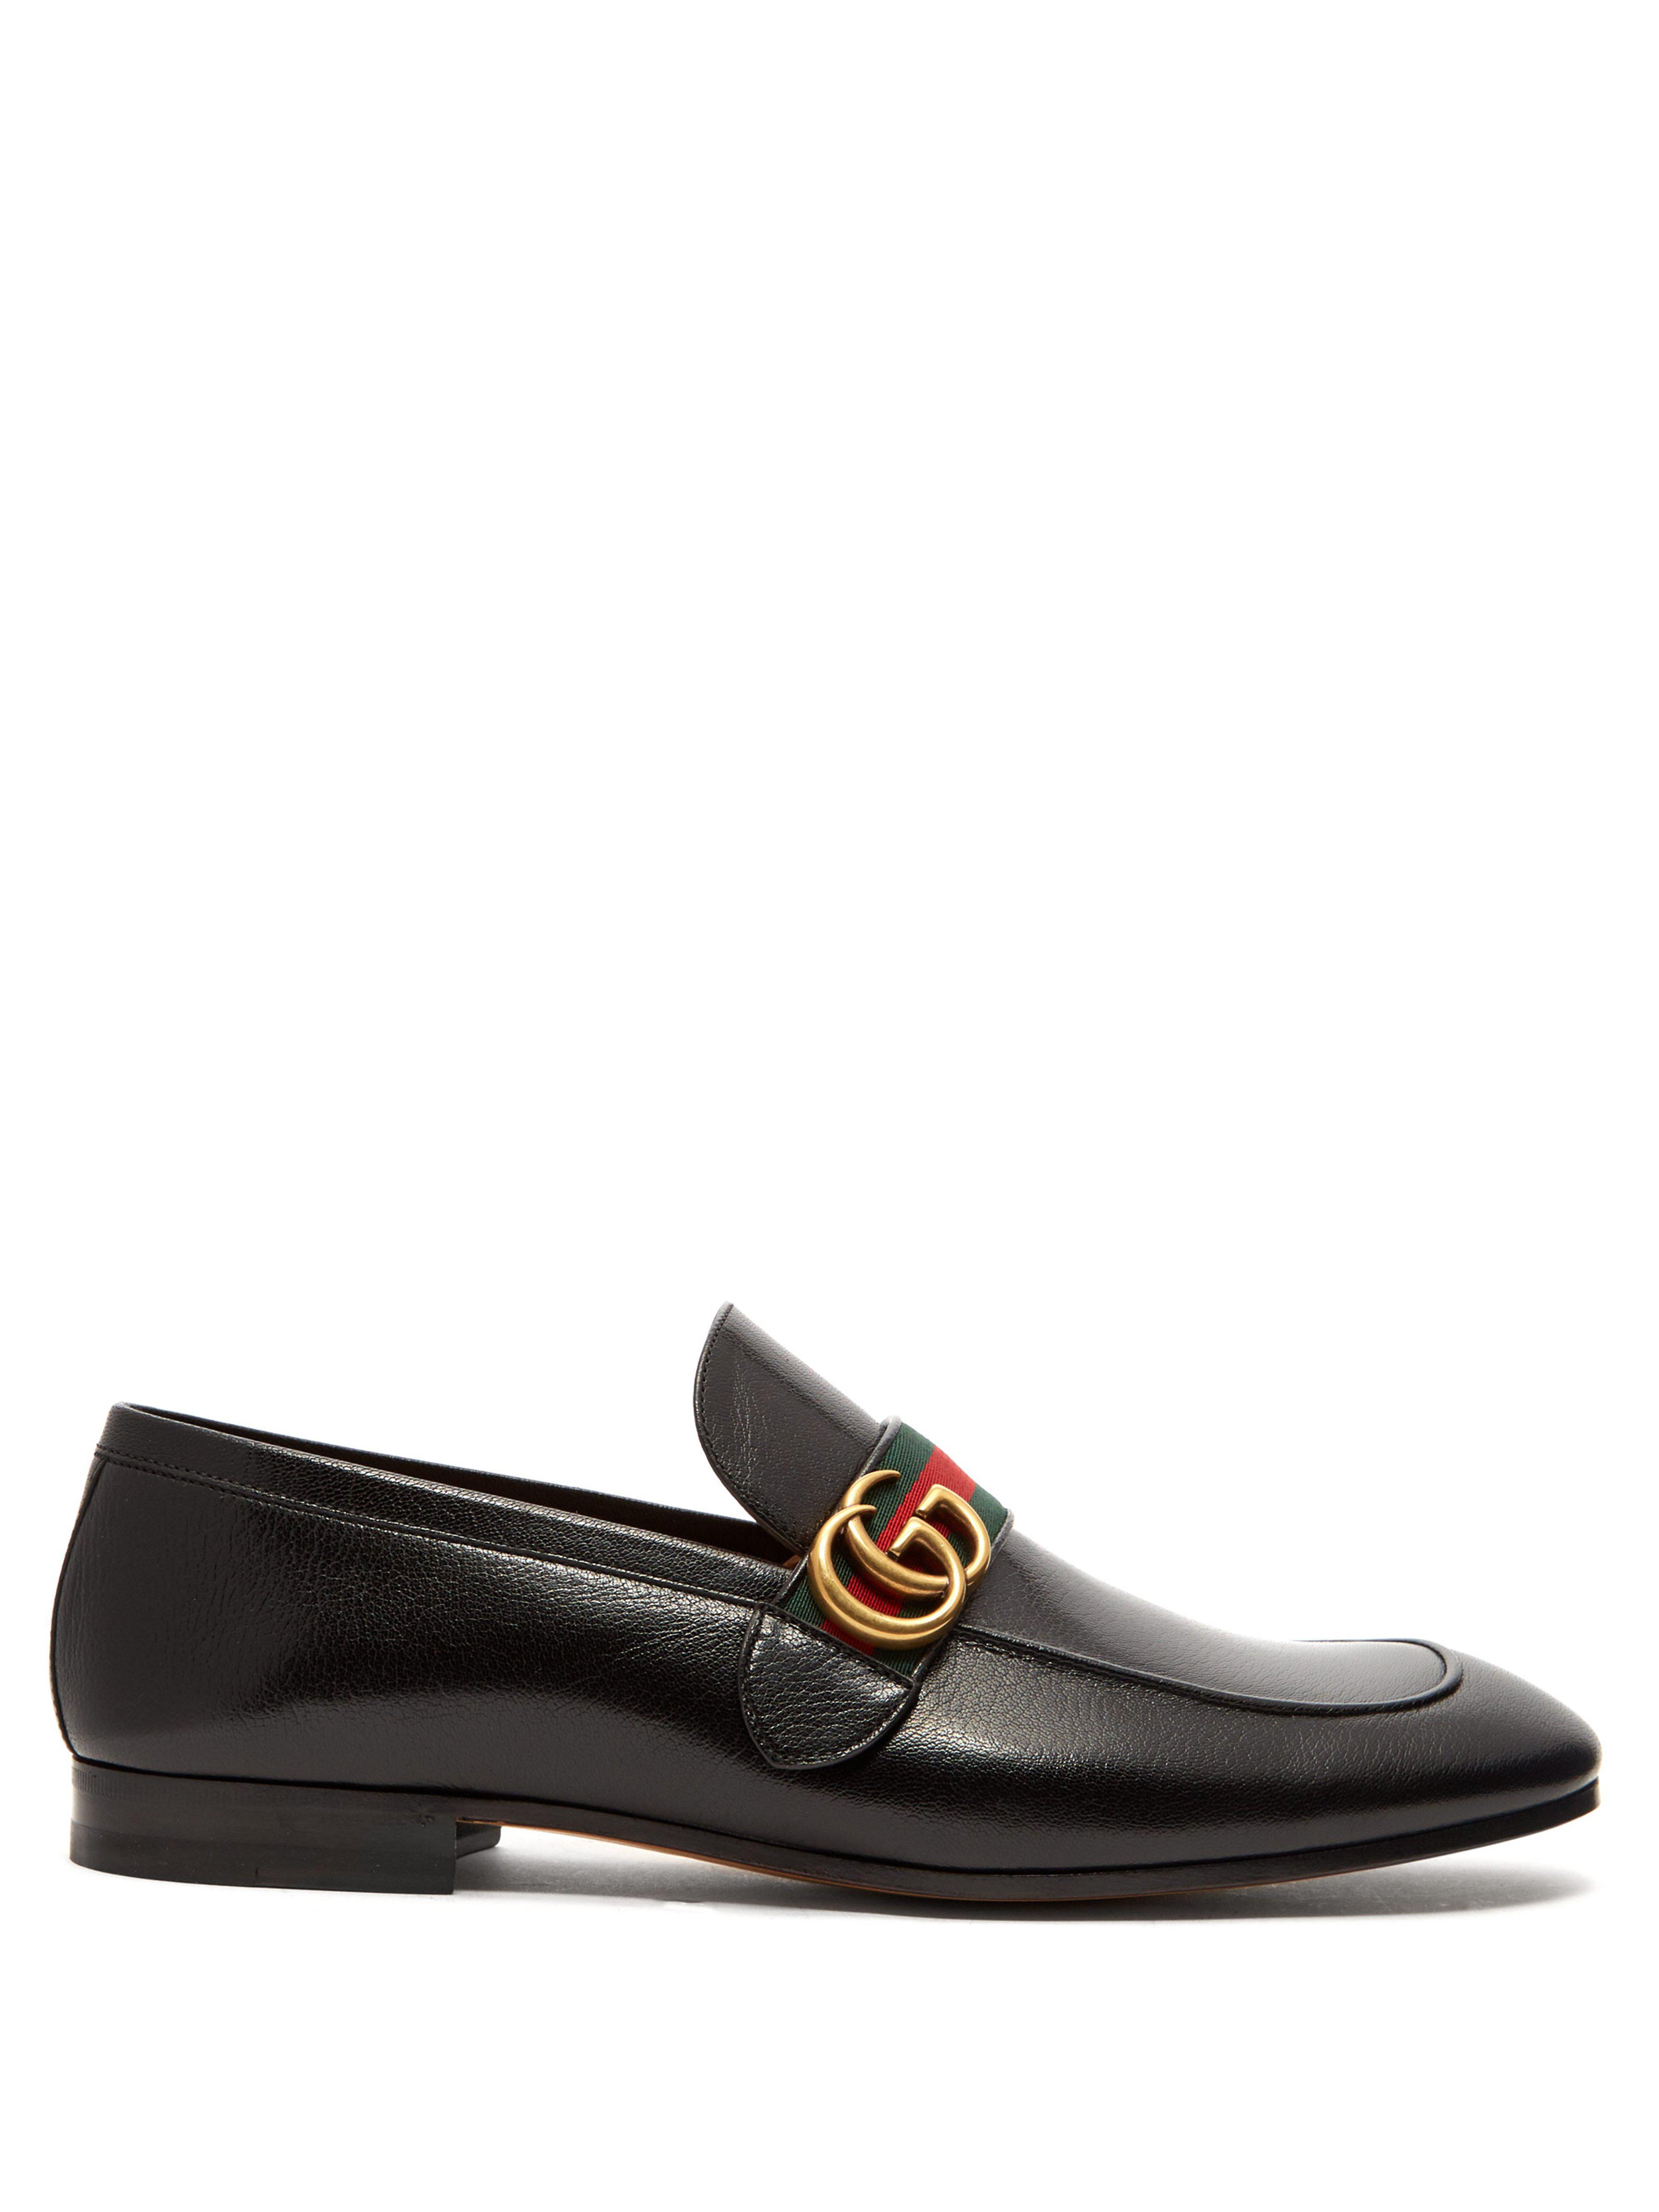 Gucci Donnie Gg Web Stripe Leather Loafers in Black for Men - Lyst